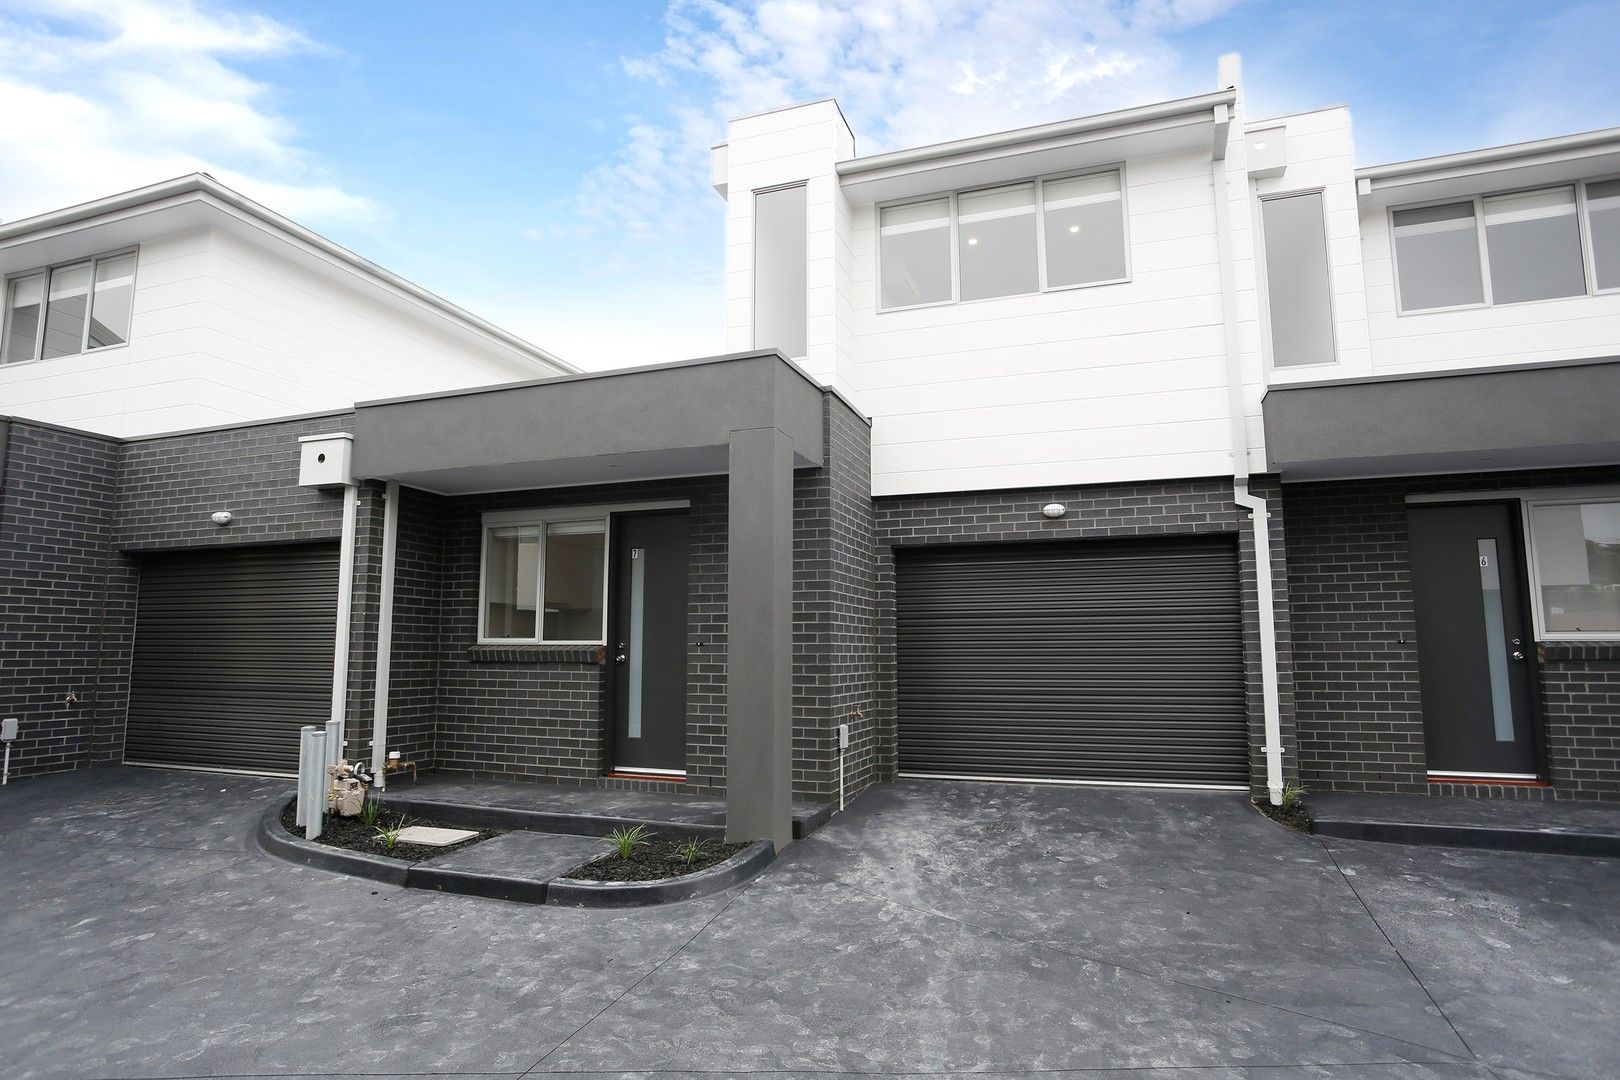 2 bedrooms Townhouse in 7/662-664 Pascoe Vale Road OAK PARK VIC, 3046